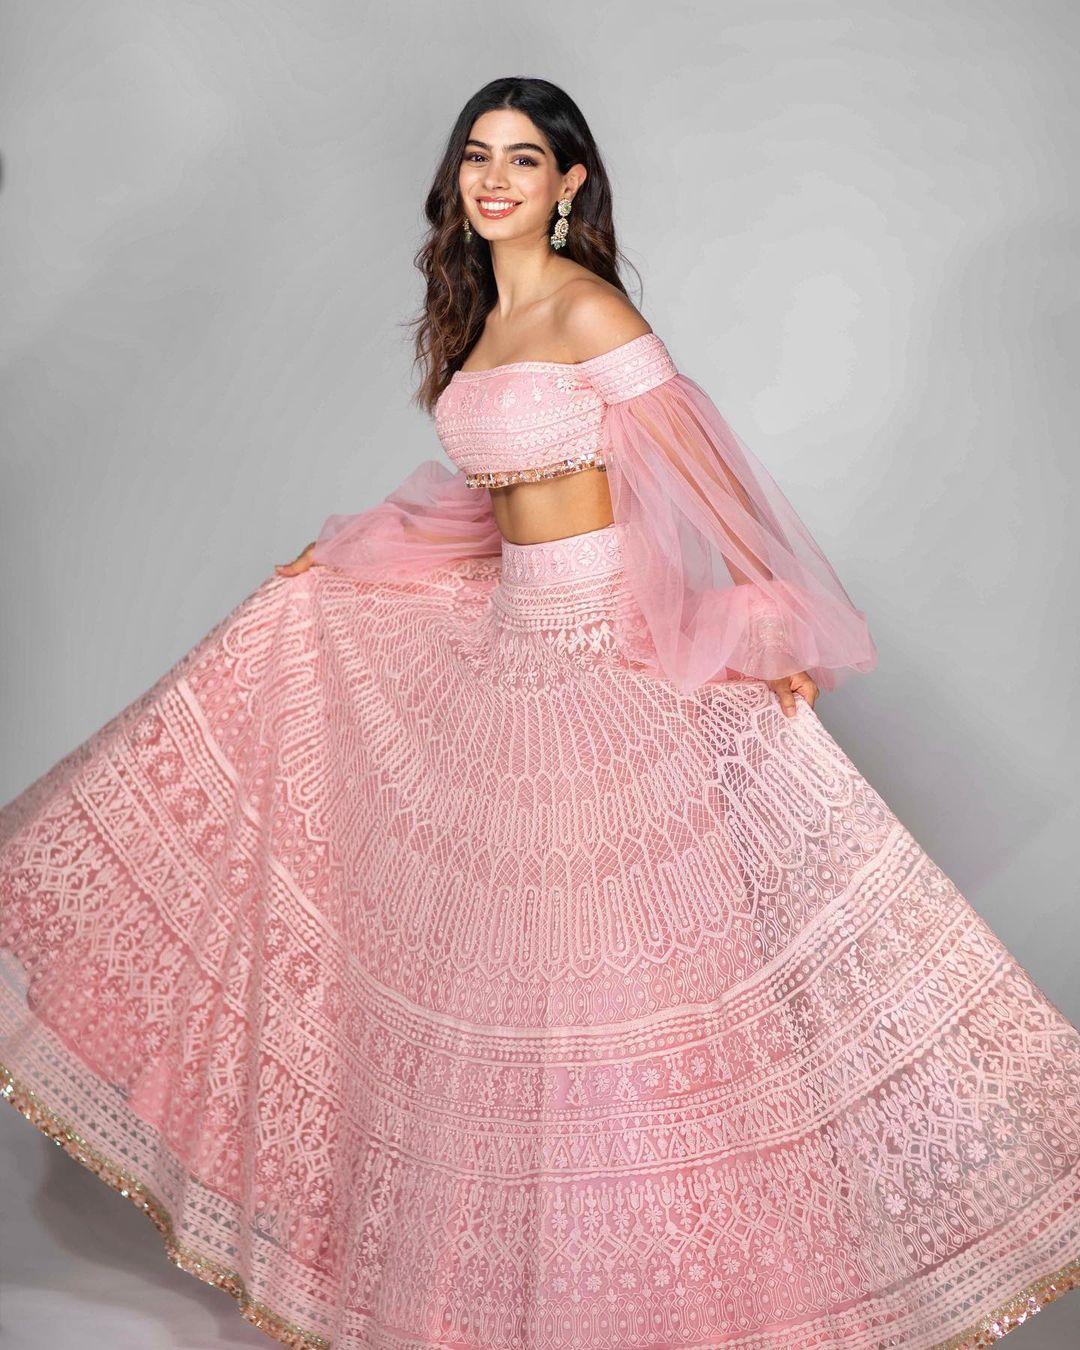 The actress wore the heavily embroidered lehenga and left her hair open and put a stunning set of earrings to complete her look